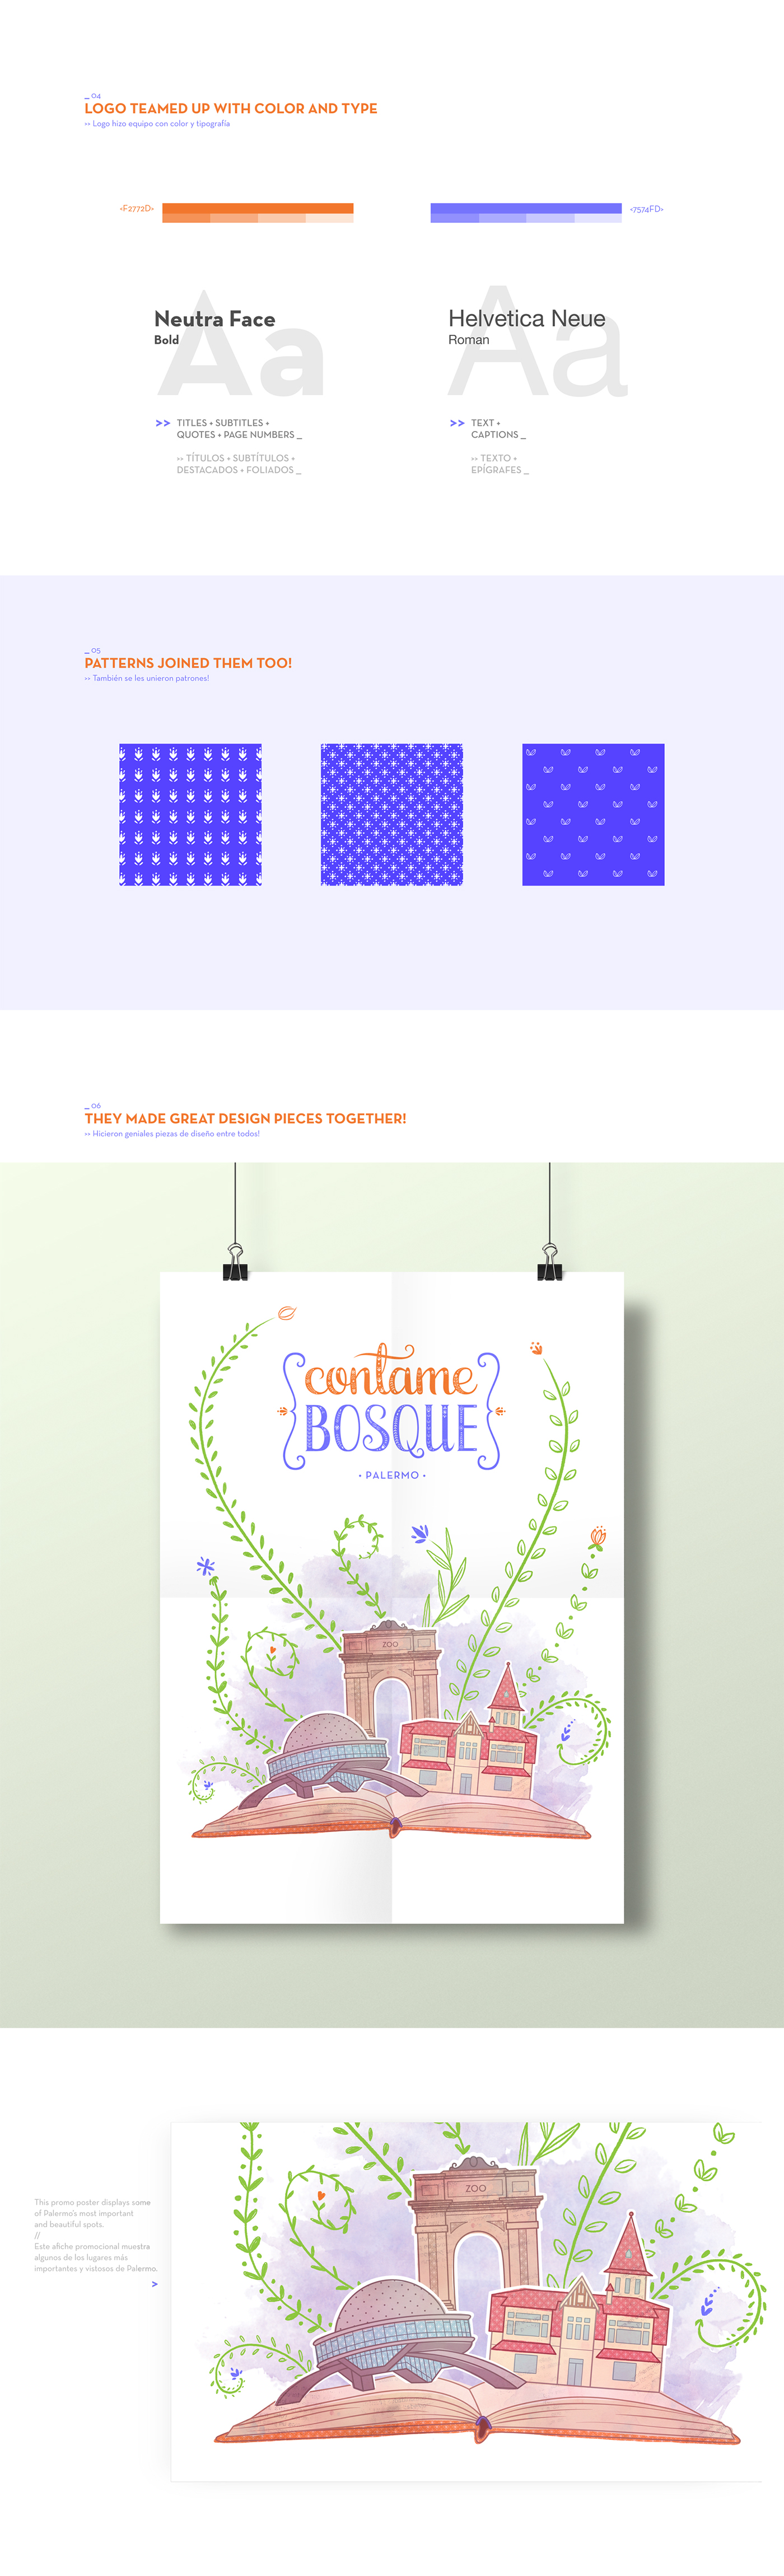 contame bosque Event buenos aires uade Palermo poster logo lettering postcards